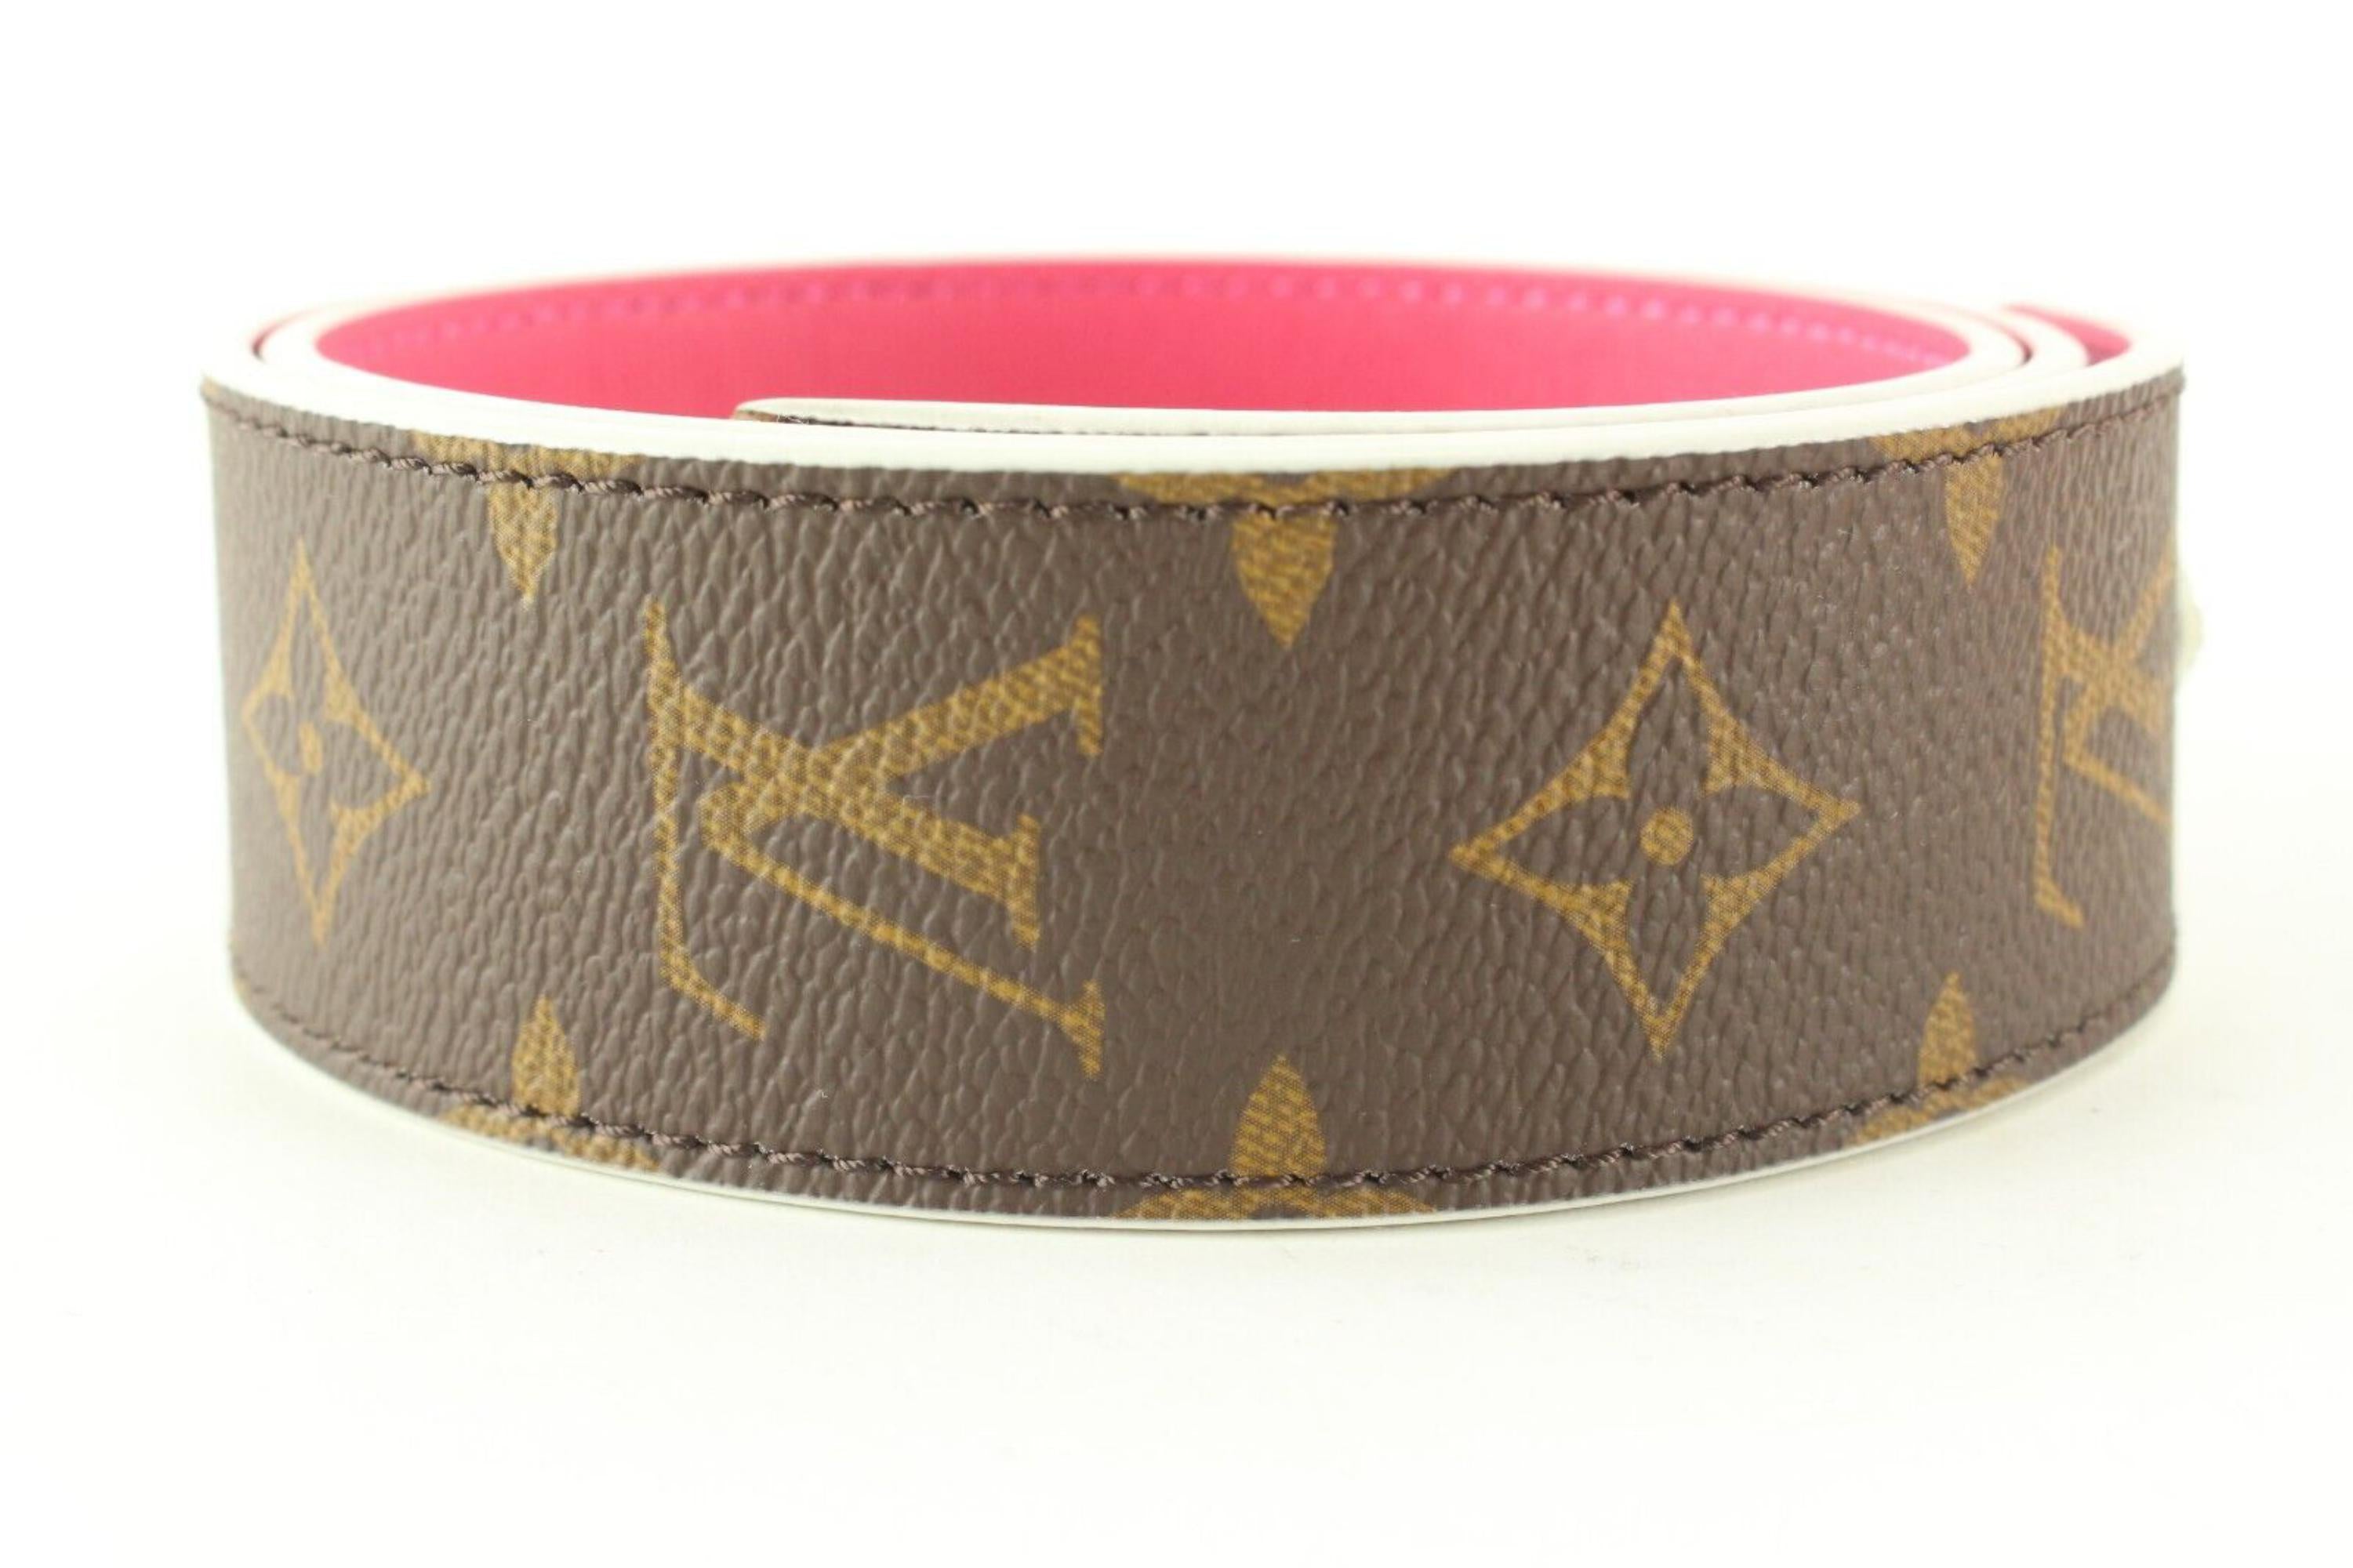 Guitar Strap Louis Vuitton - 3 For Sale on 1stDibs